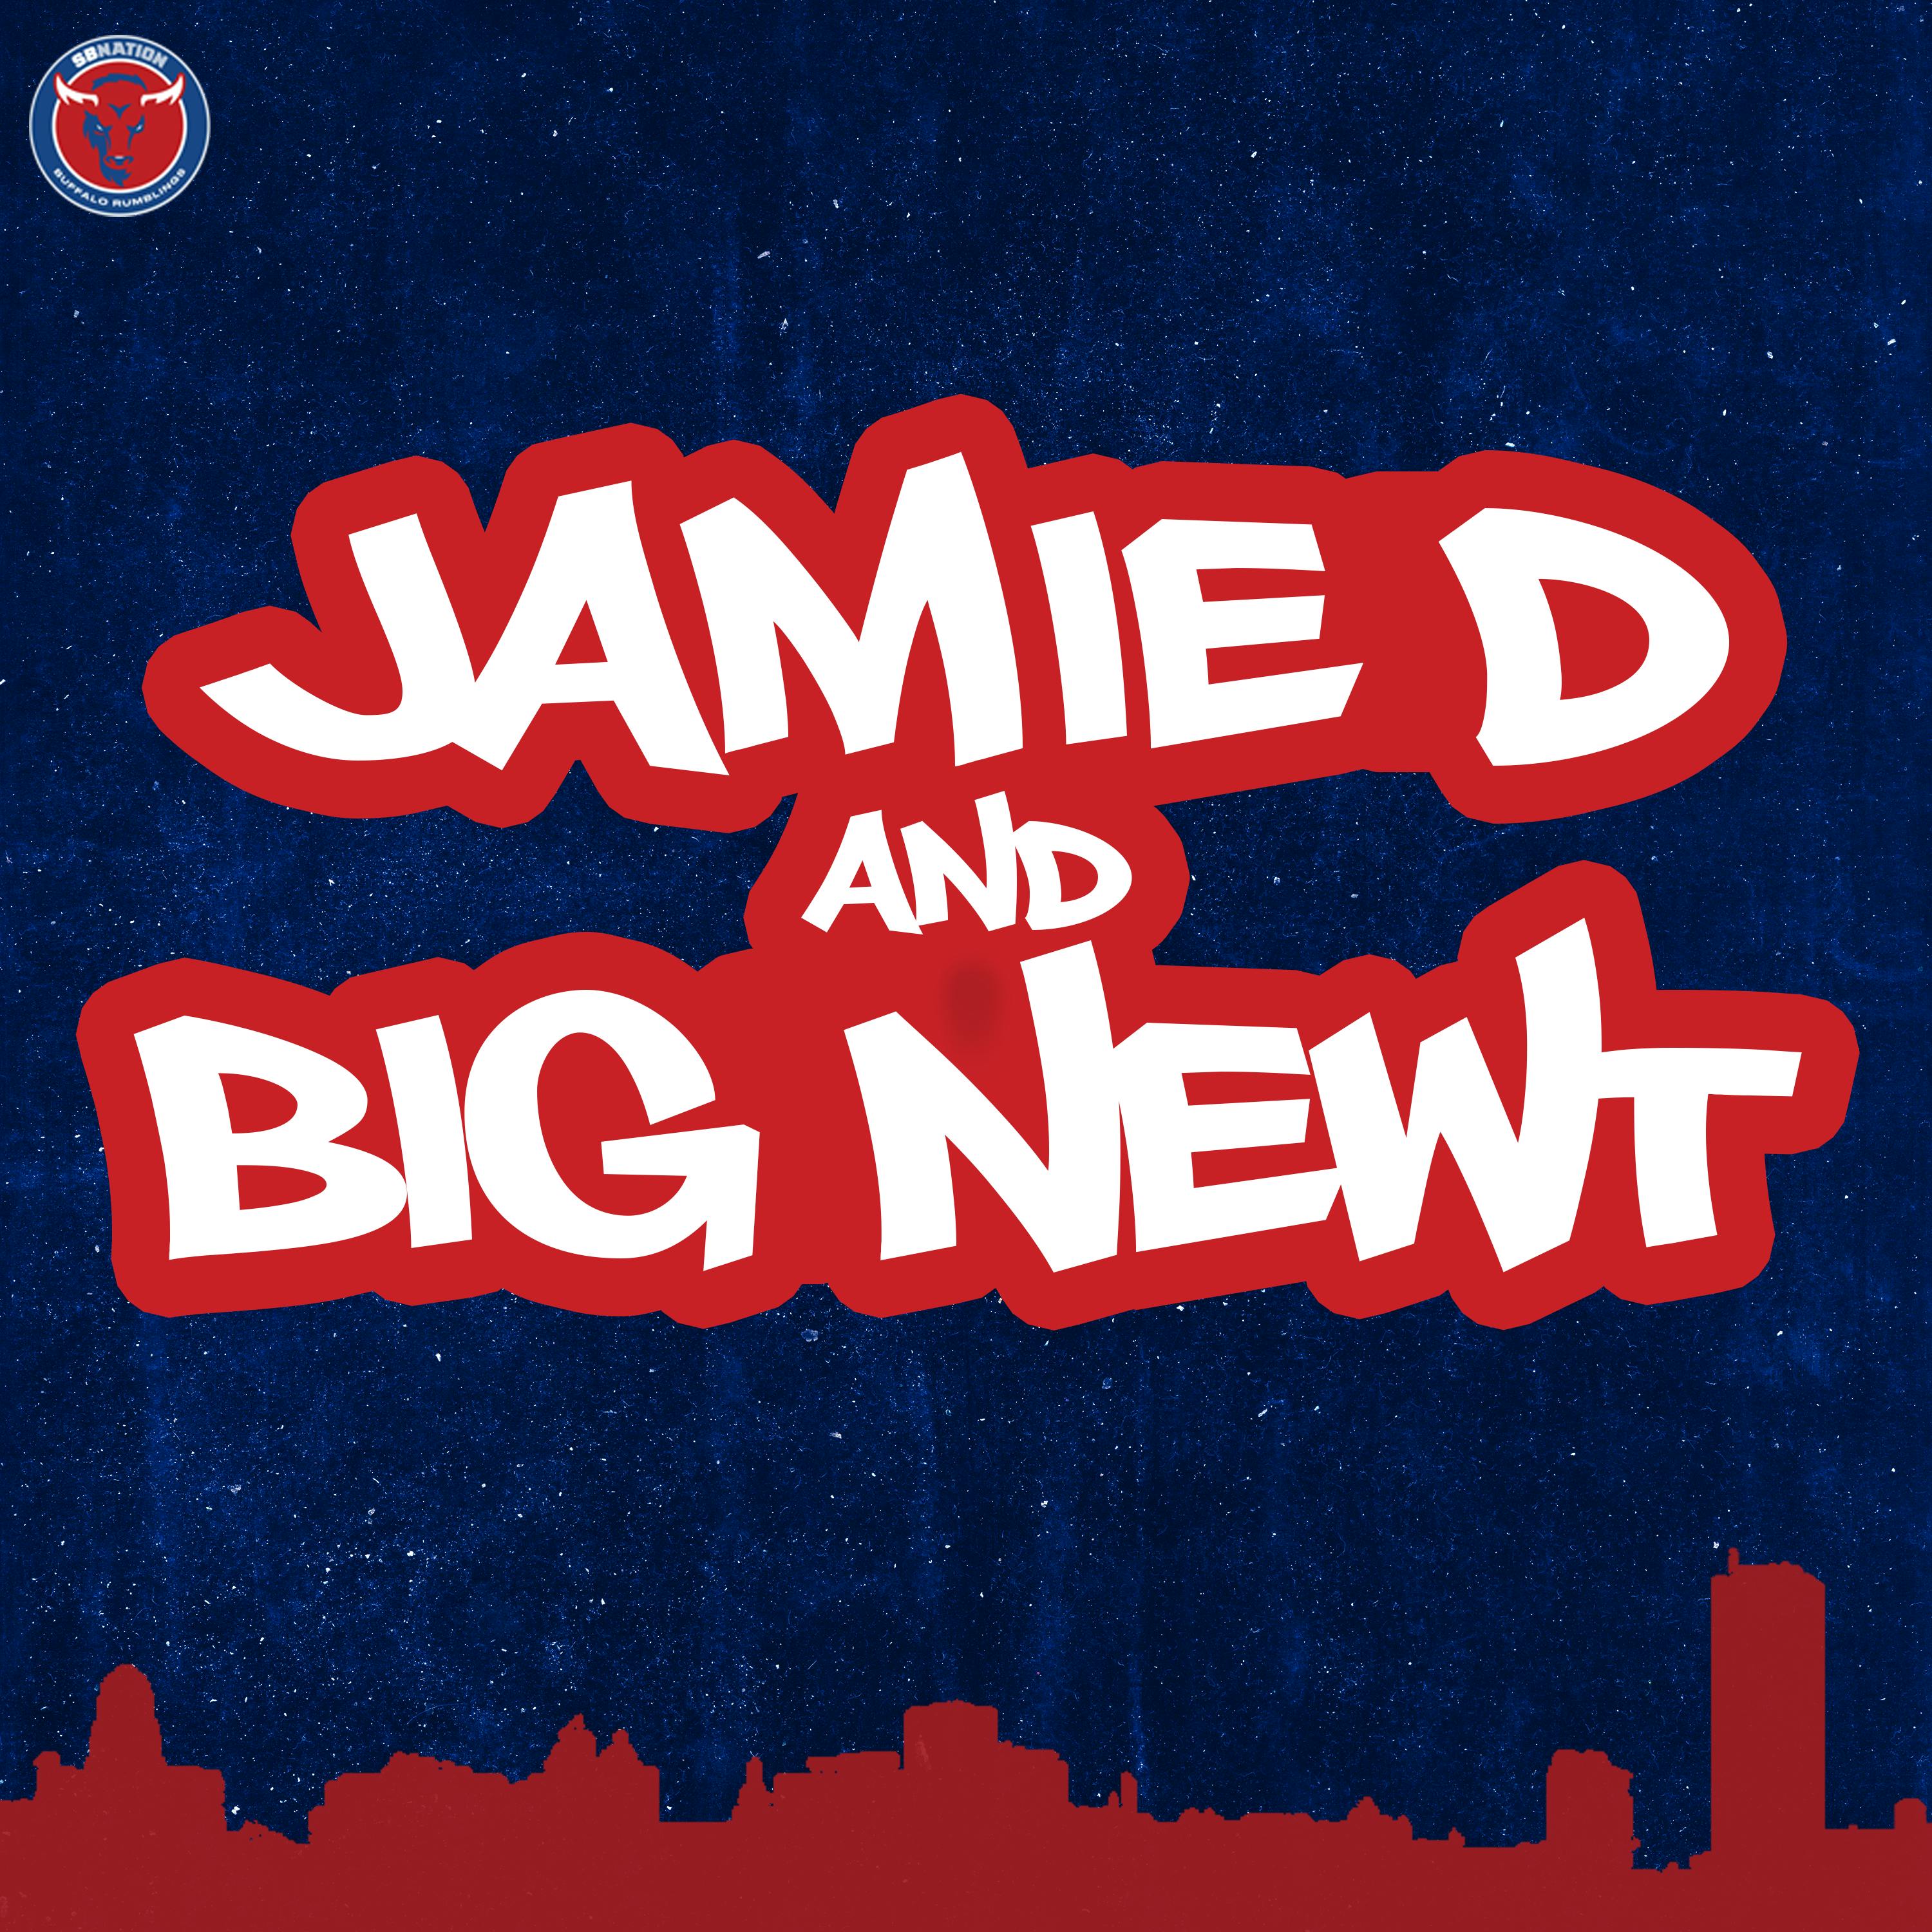 Jamie D & Big Newt: What to look for in the first preseason game